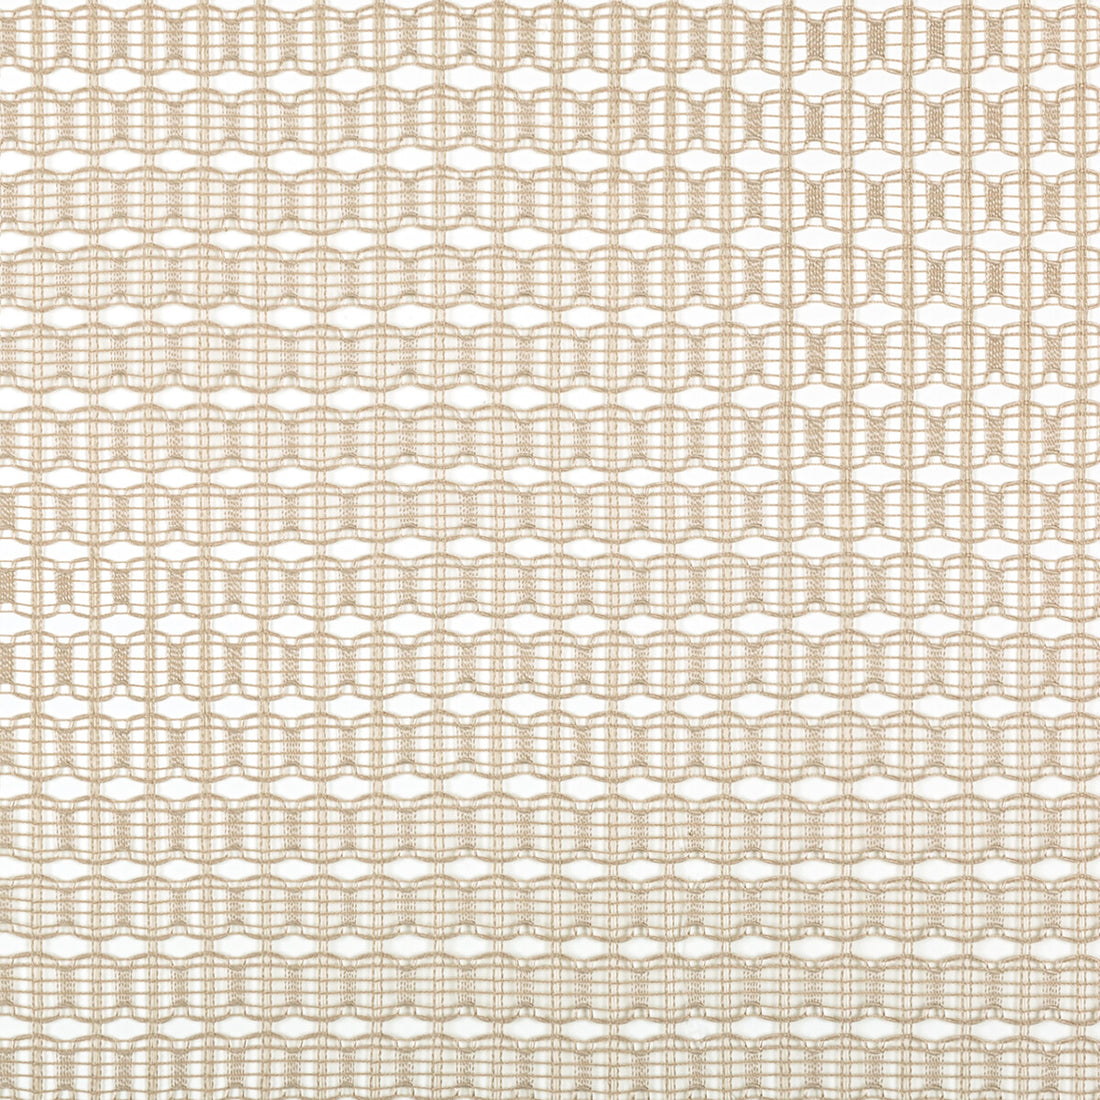 Cast On fabric in linen color - pattern 4822.16.0 - by Kravet Contract